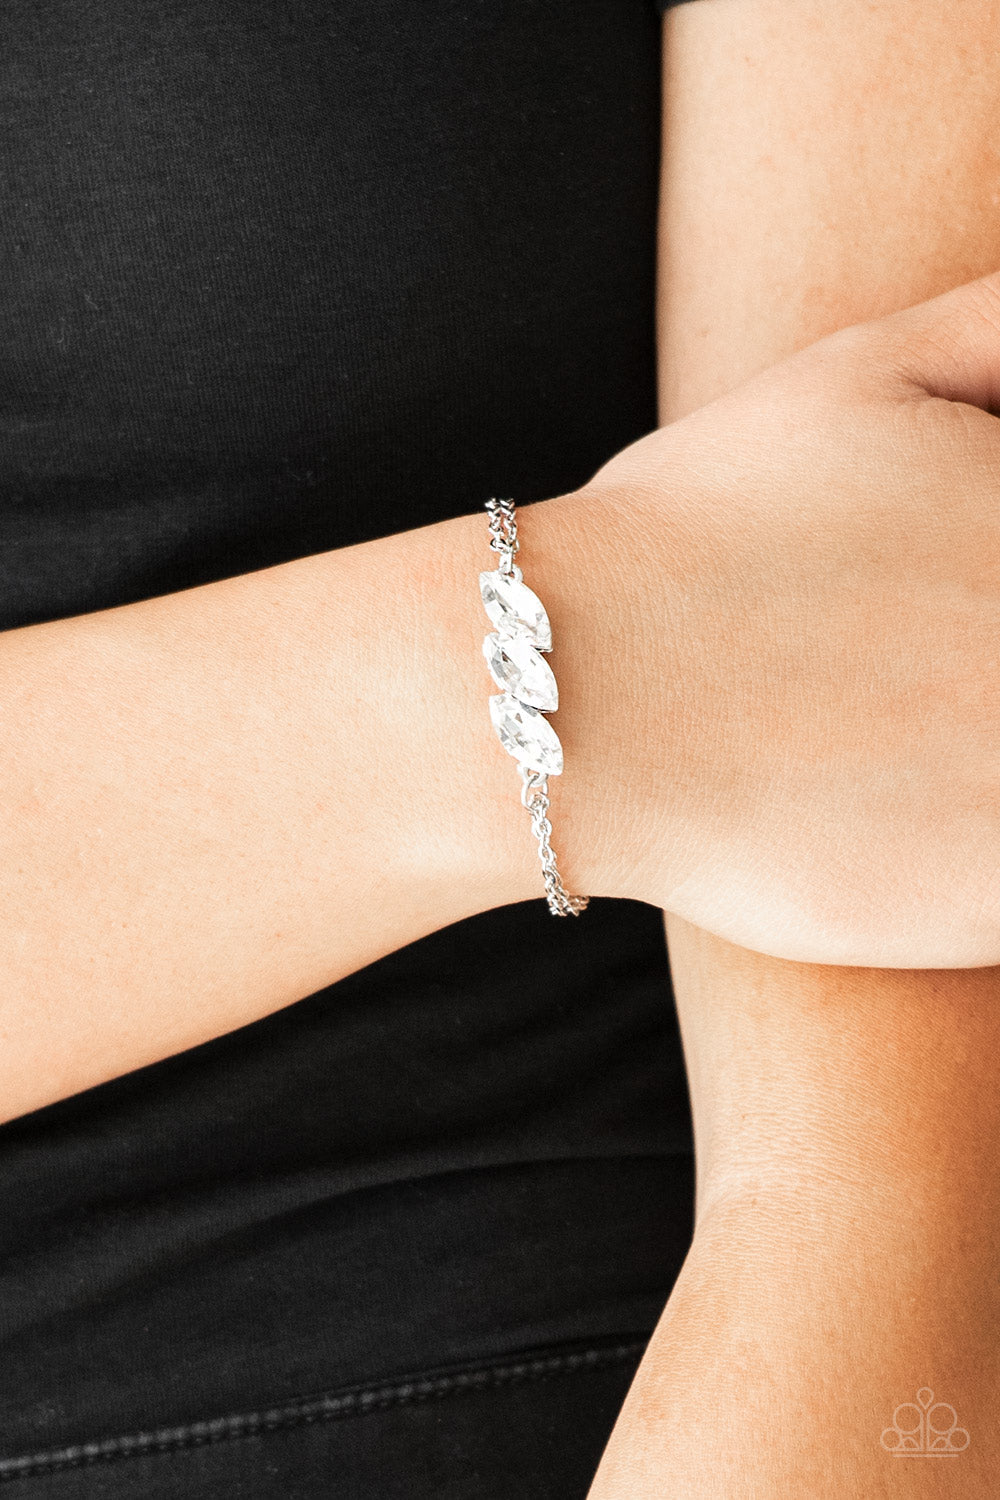 Pretty Priceless - White and Silver Bling Bracelet - Paparazzi Accessories - Featuring regal marquise-cuts, a trio of glittery white rhinestones join across the center of the wrist for a timeless look. Features an adjustable clasp closure. Sold as one individual bracelet.